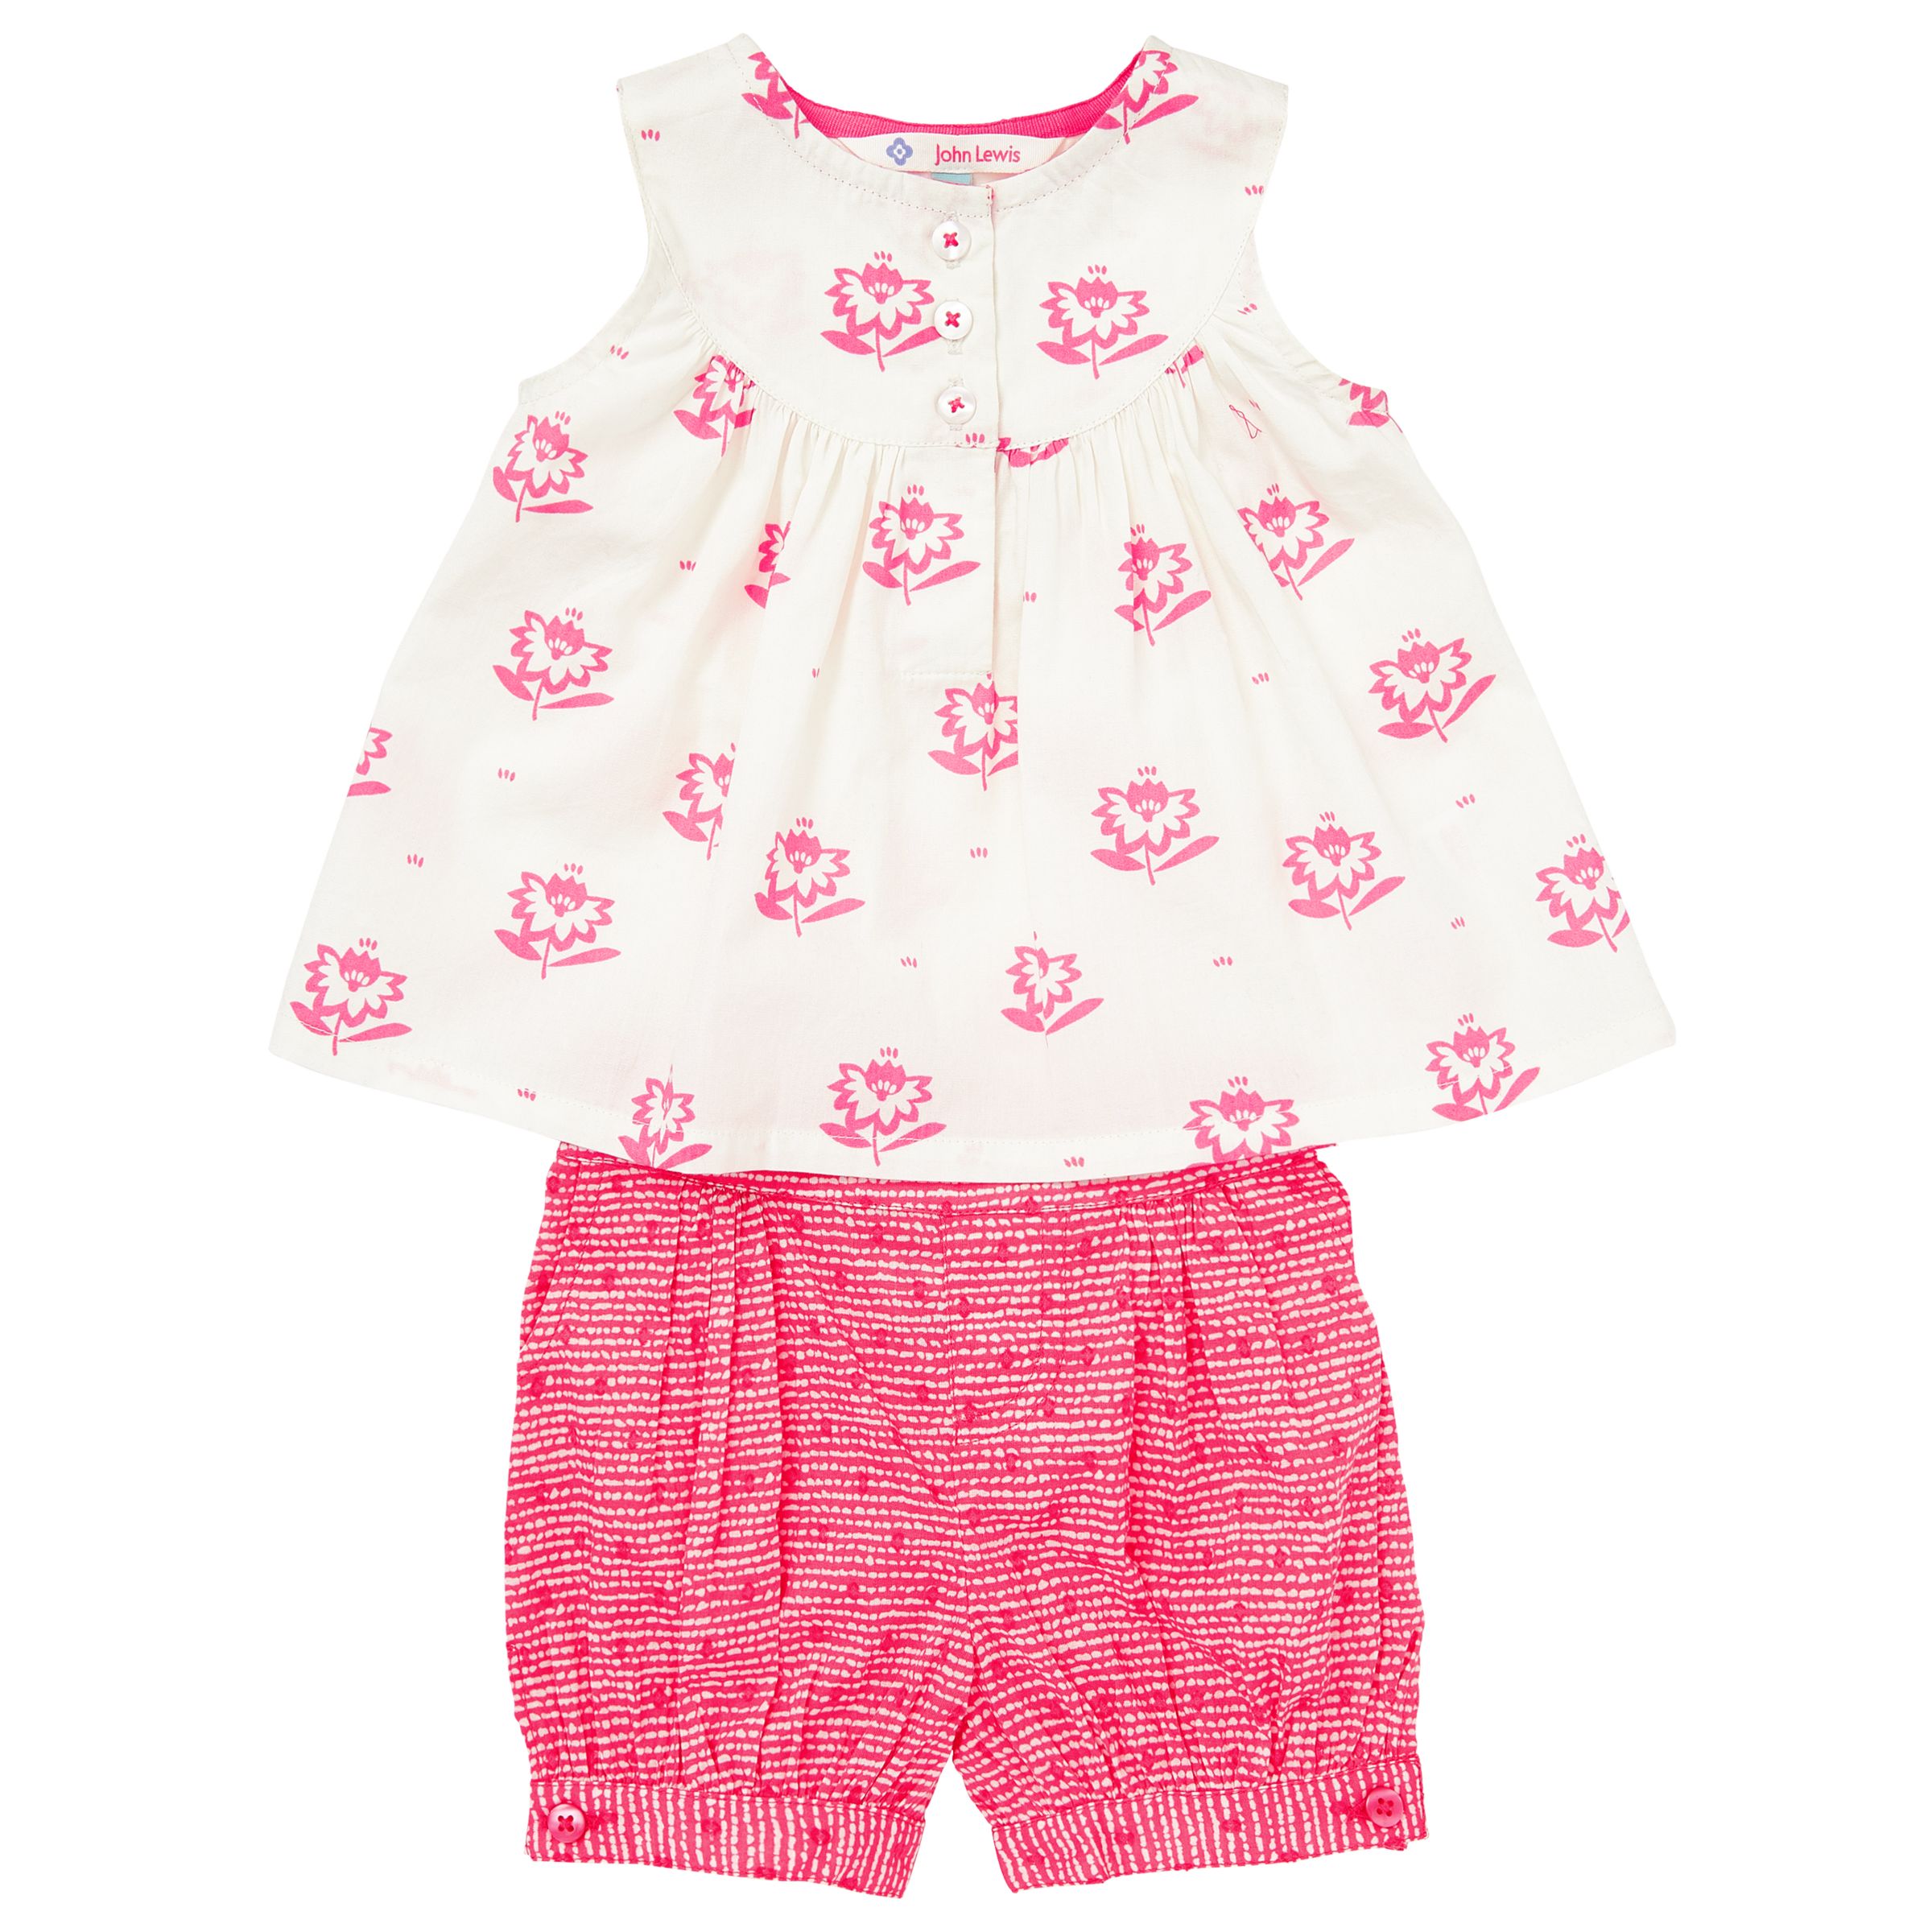 Baby & Toddler Girls' Clothes | Girls' Dresses, Sets and Bodysuits ...